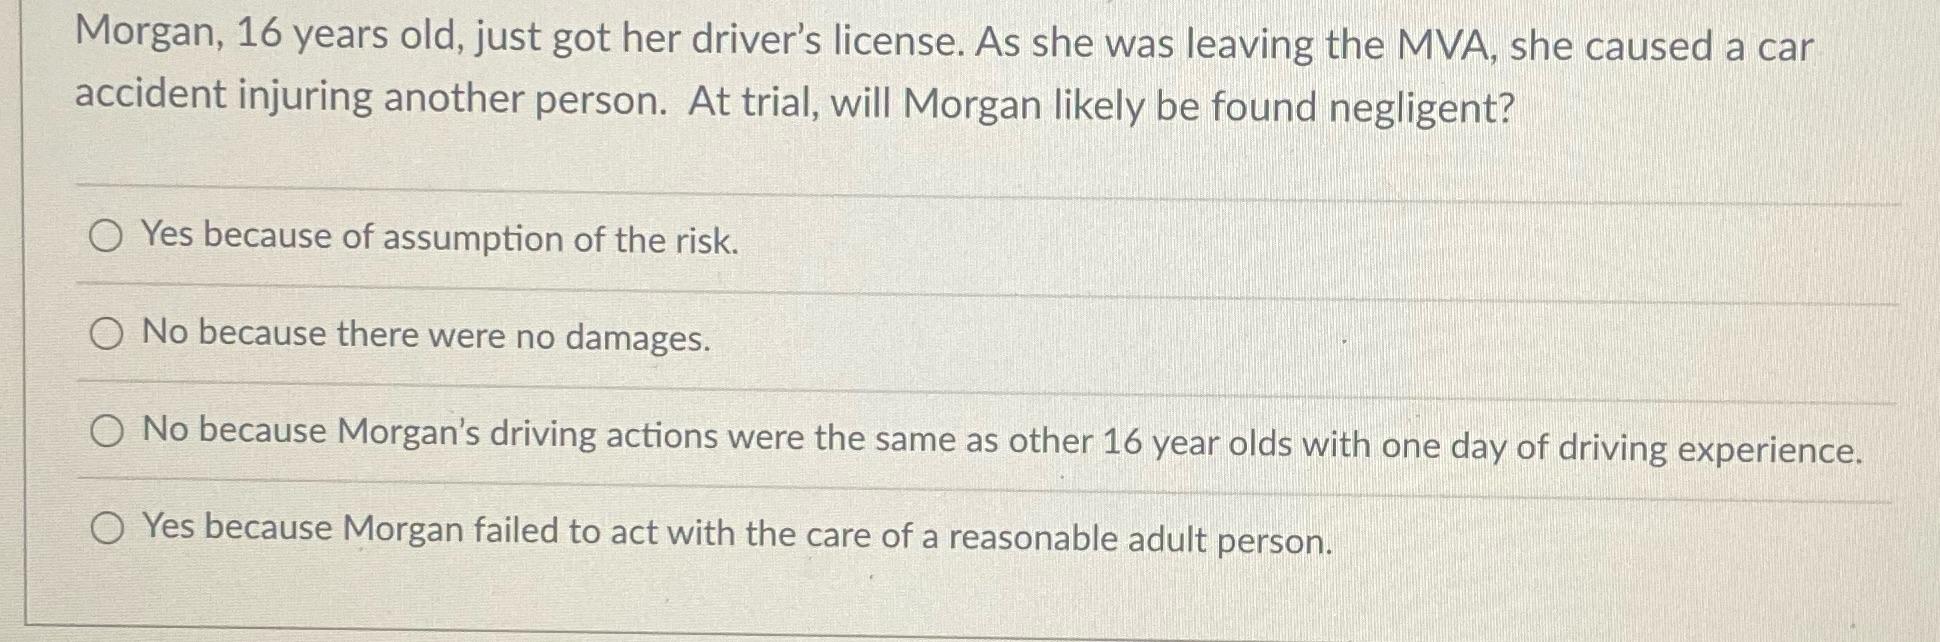 Morgan, 16 years old, just got her driver's license. As she was leaving the MVA, she caused a car accident